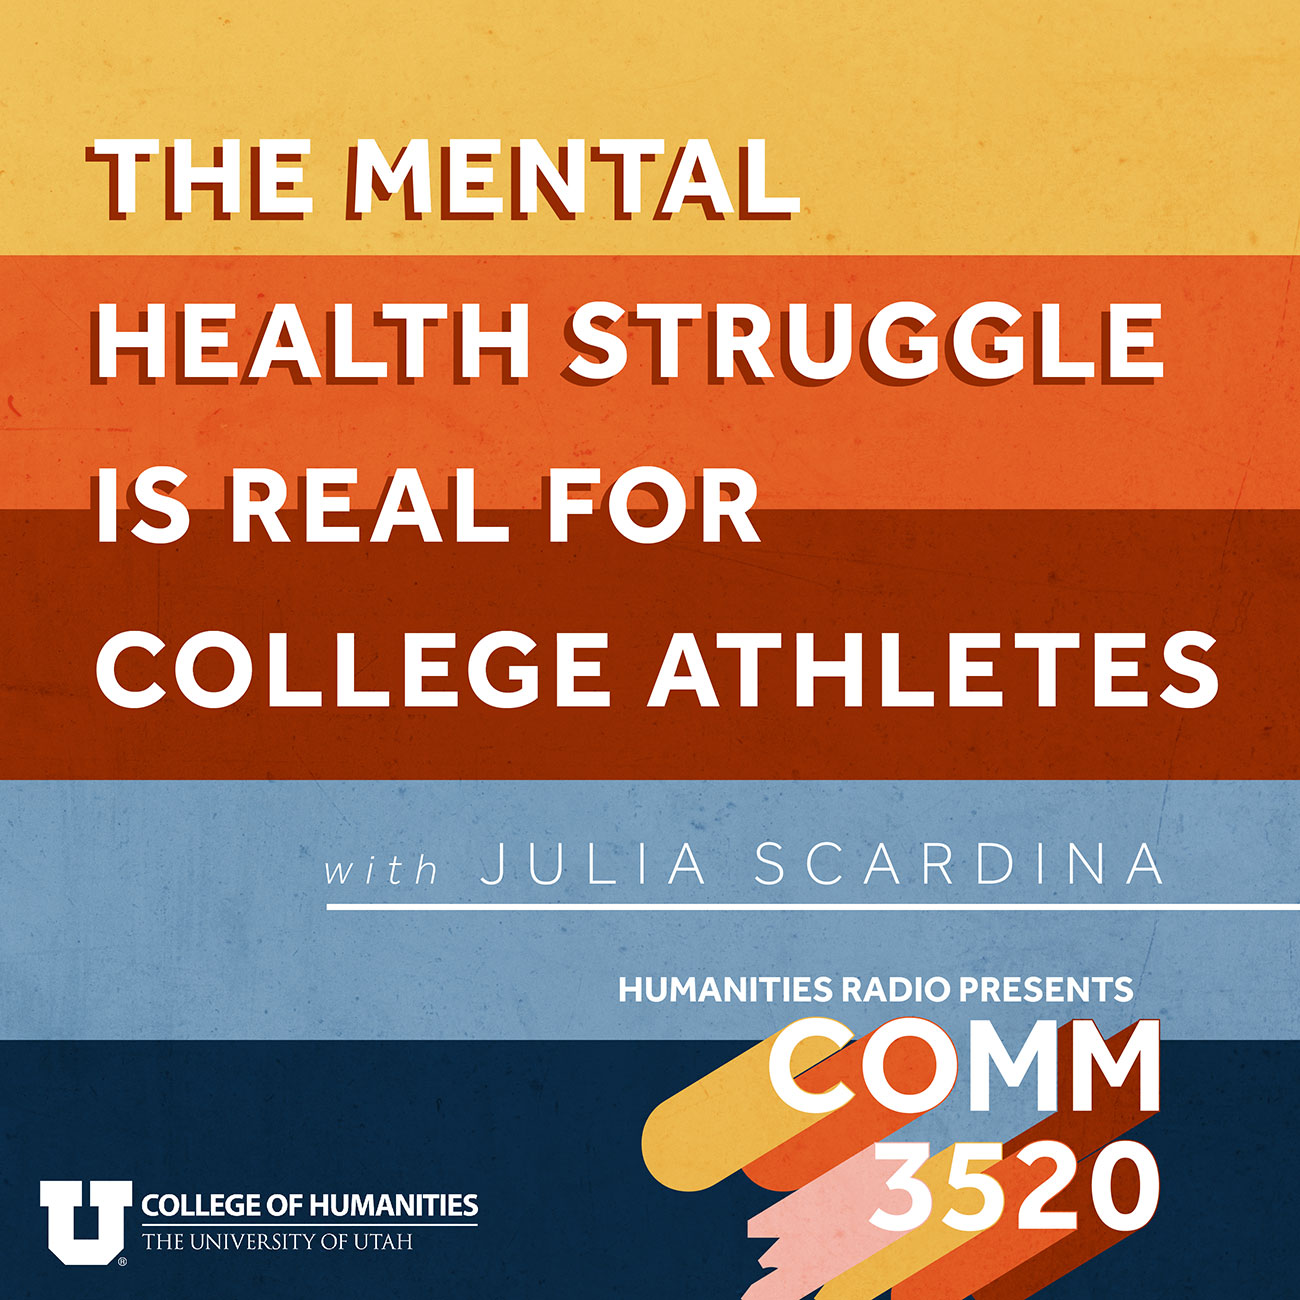 The Mental Health Struggle is Real for College Athletes